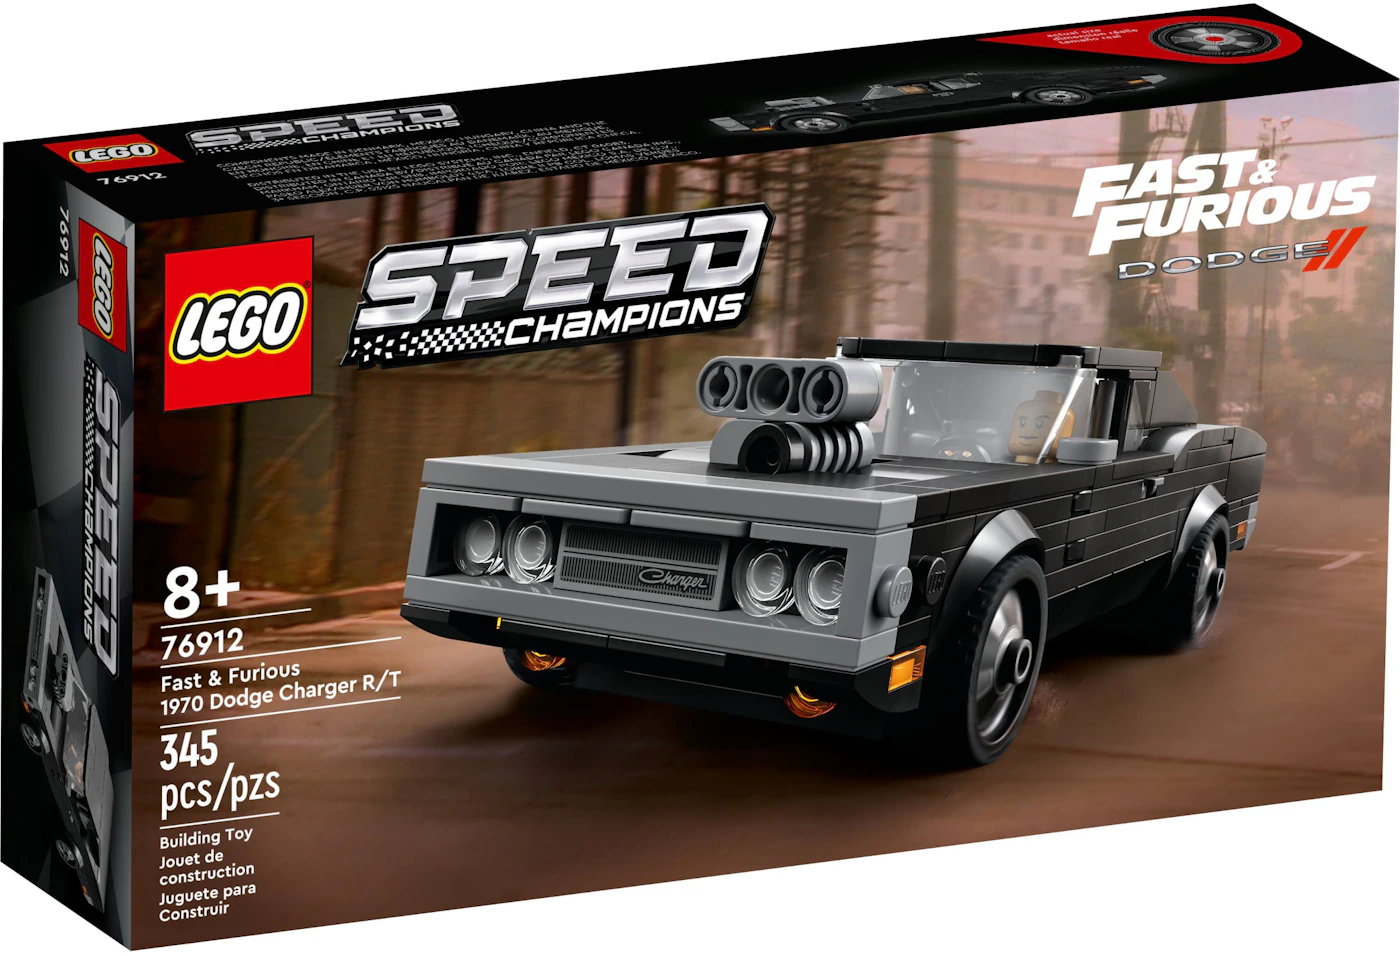 LEGO Speed Champions Fast & Furious 1970 Dodge Charger R/T Set 76912 -